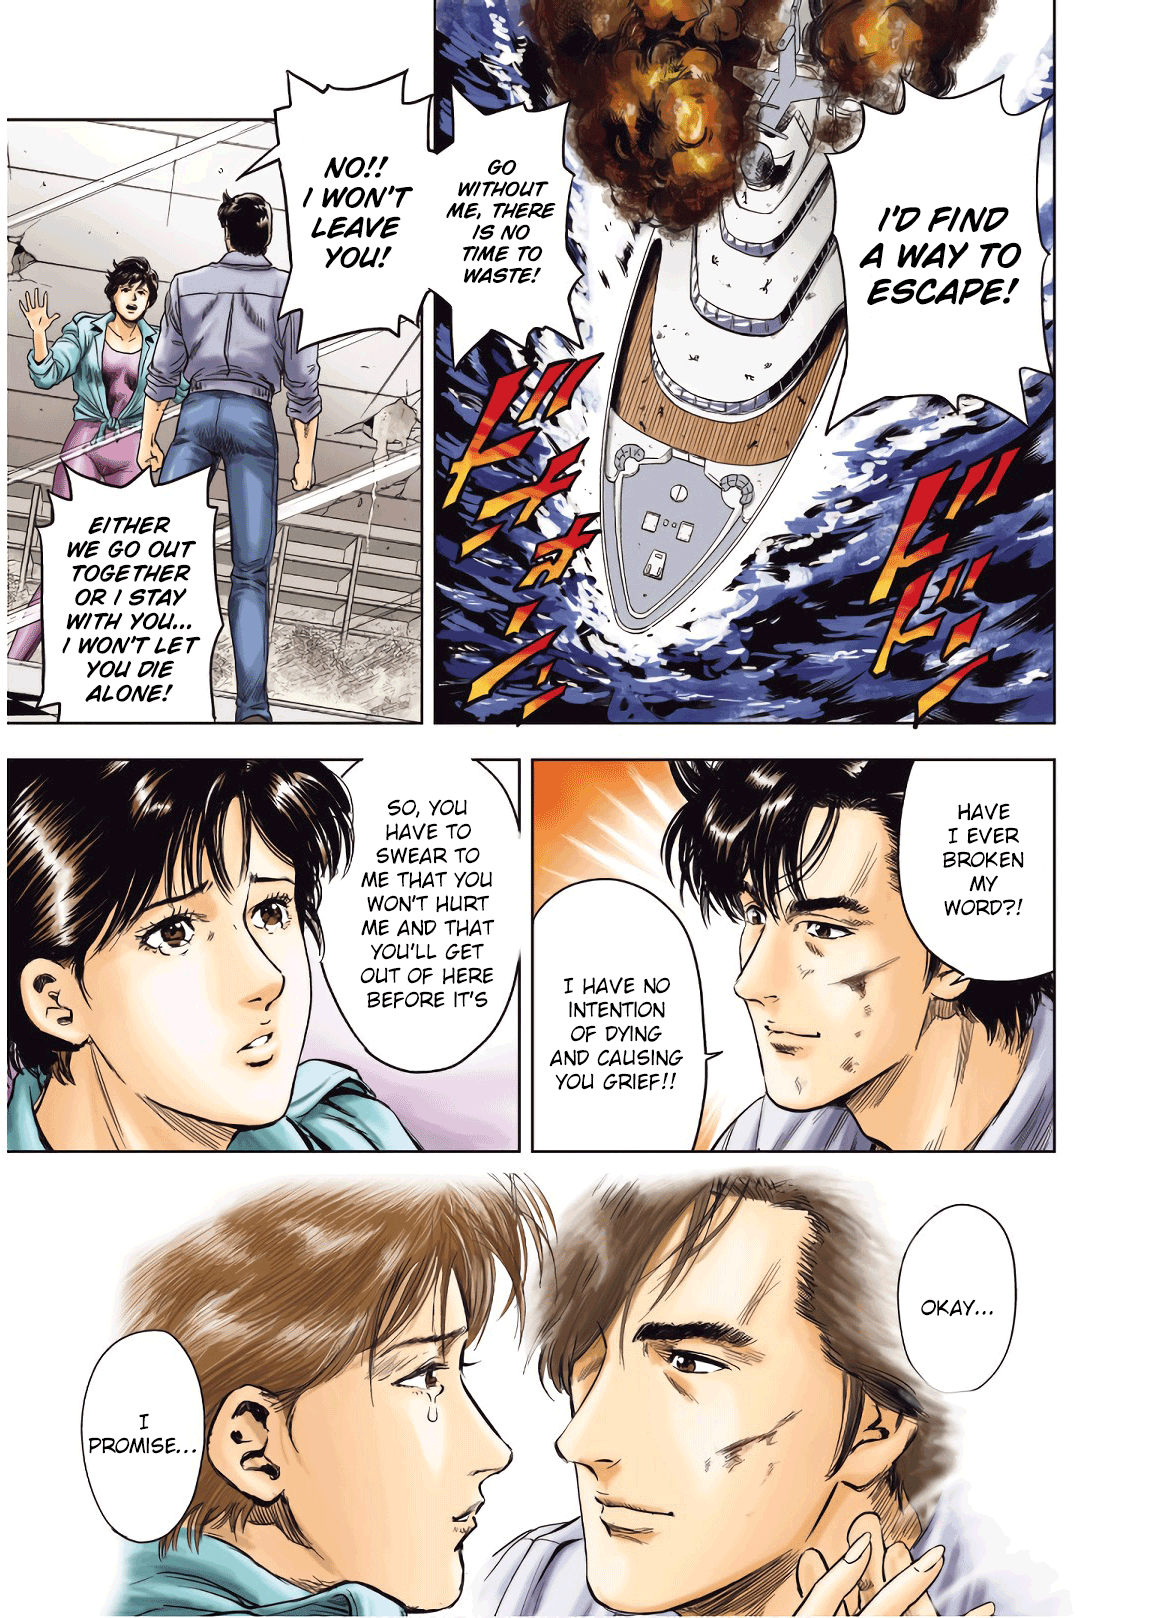 City Hunter - Rebirth Vol.1 Chapter 1: A Messadge From Another World - Picture 2